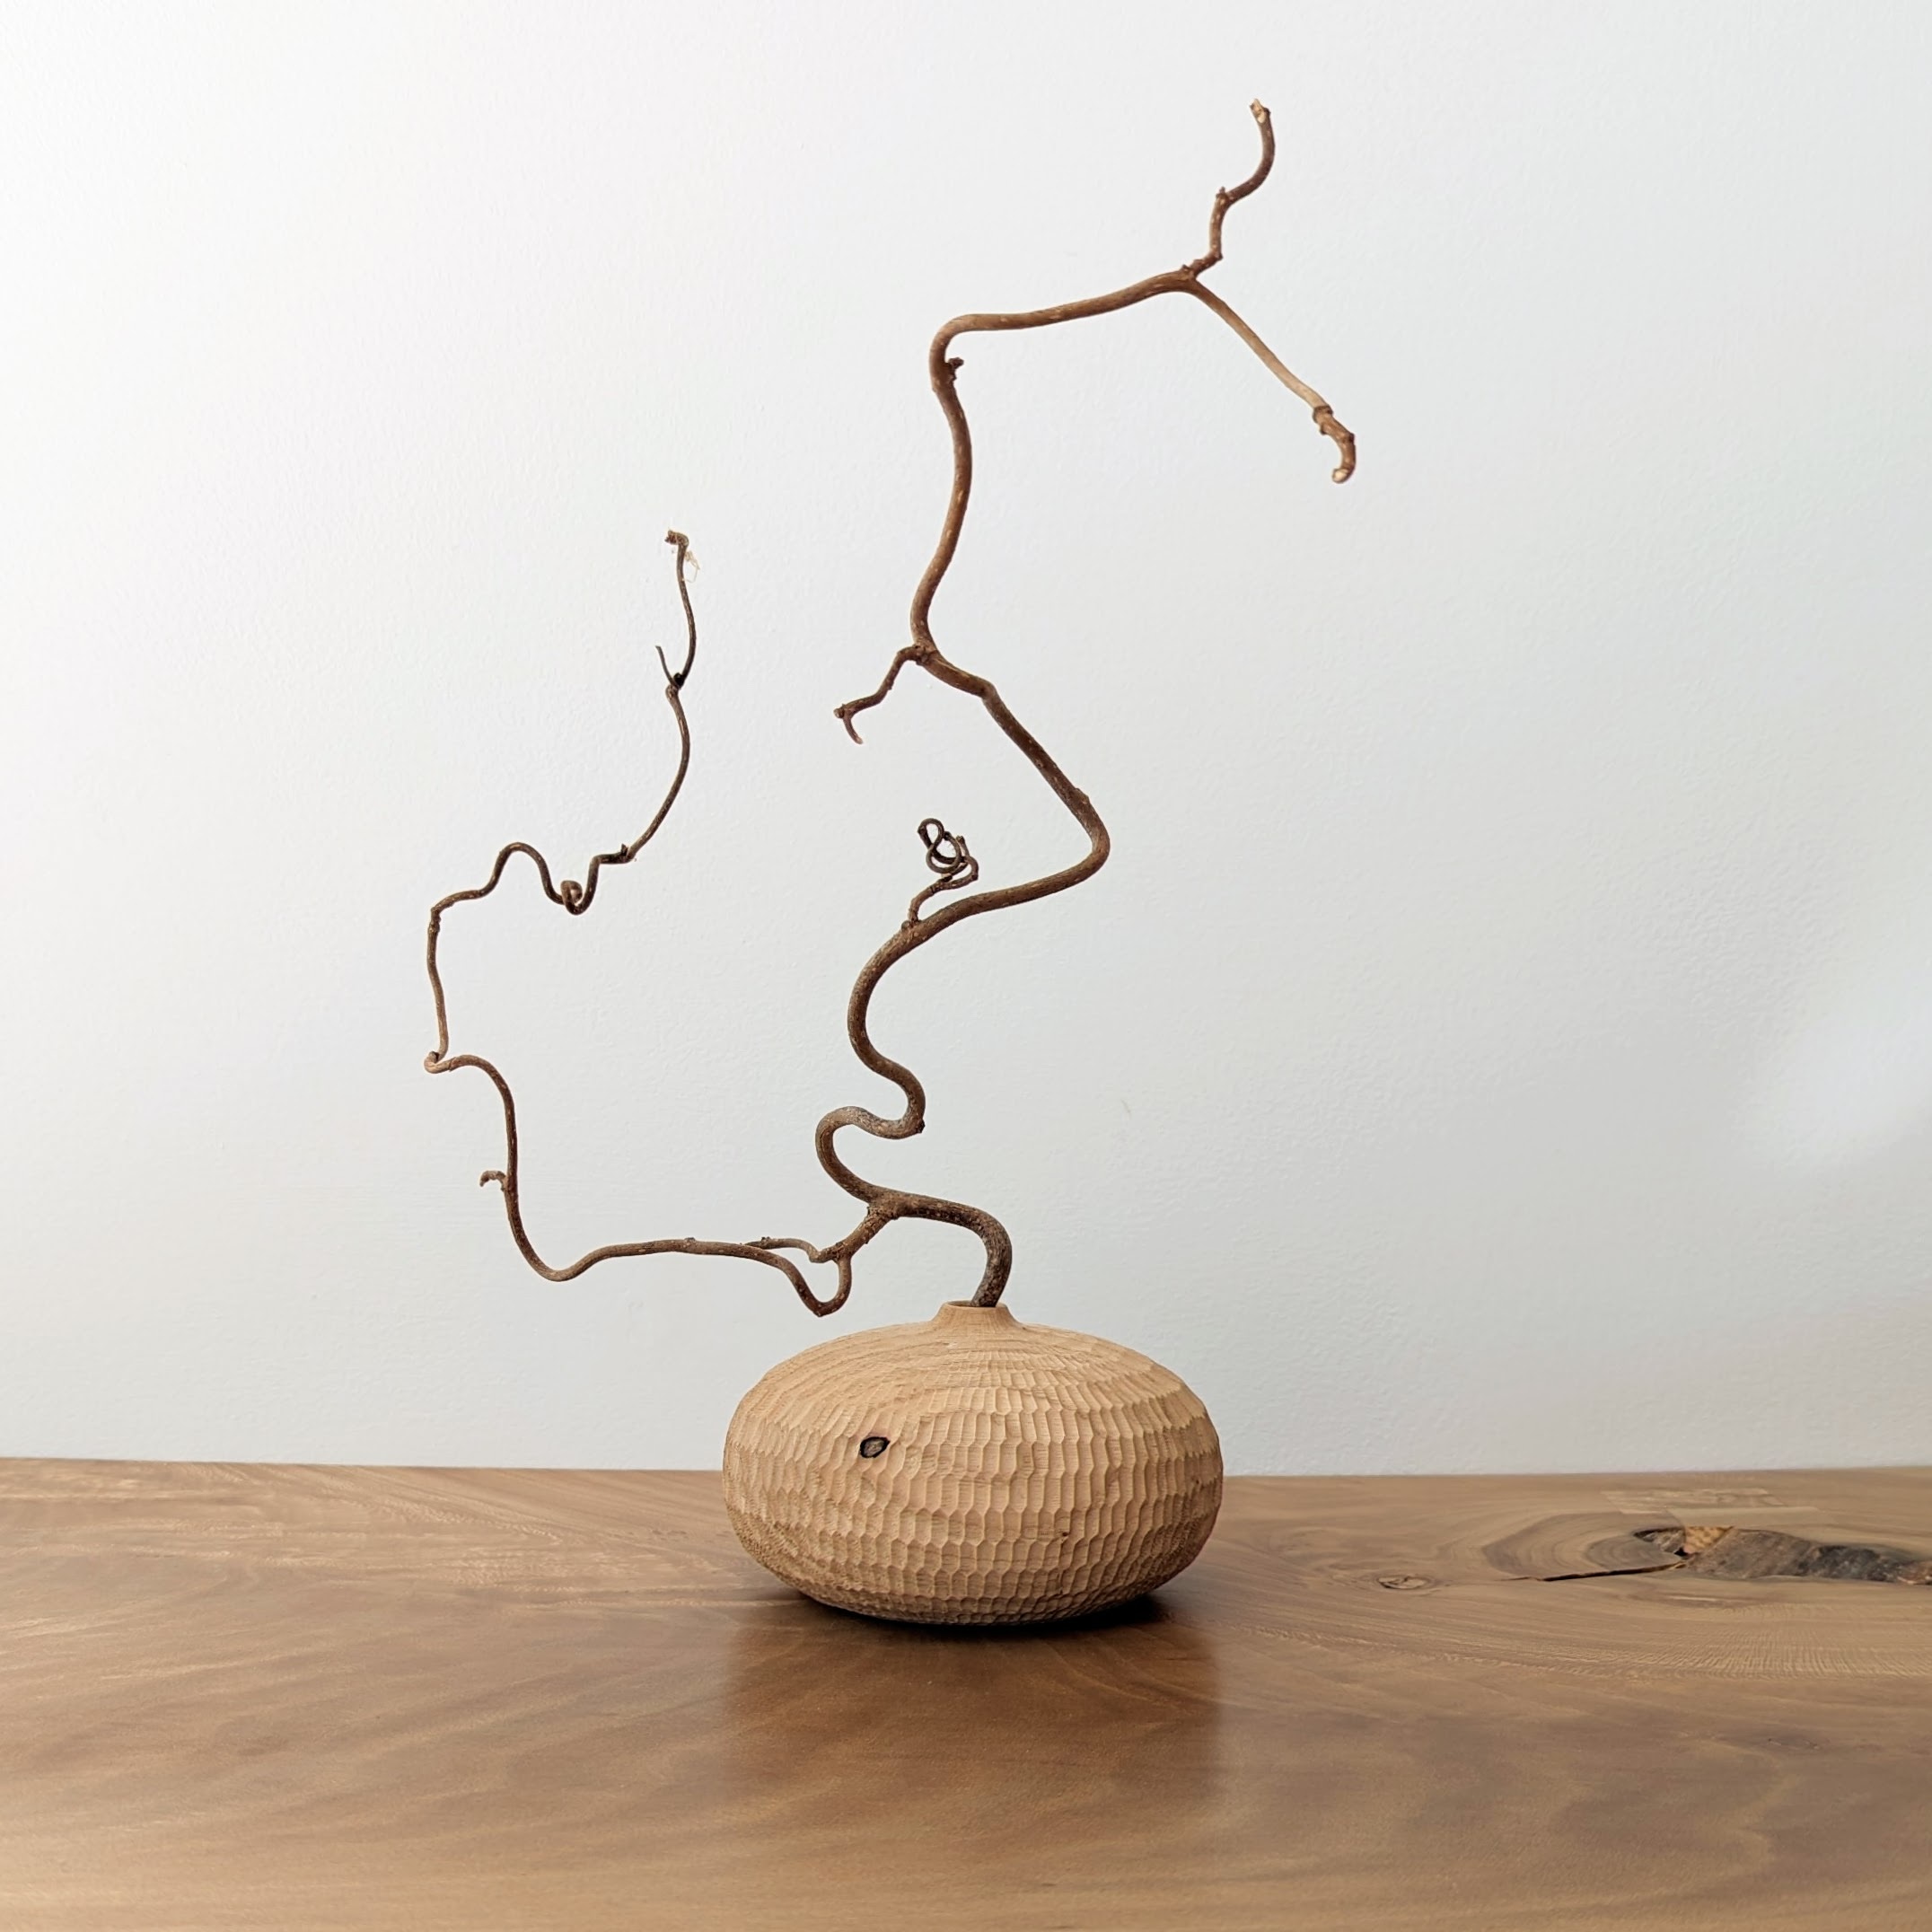 A carved wooden vessel with a twisted branch coming out of it.